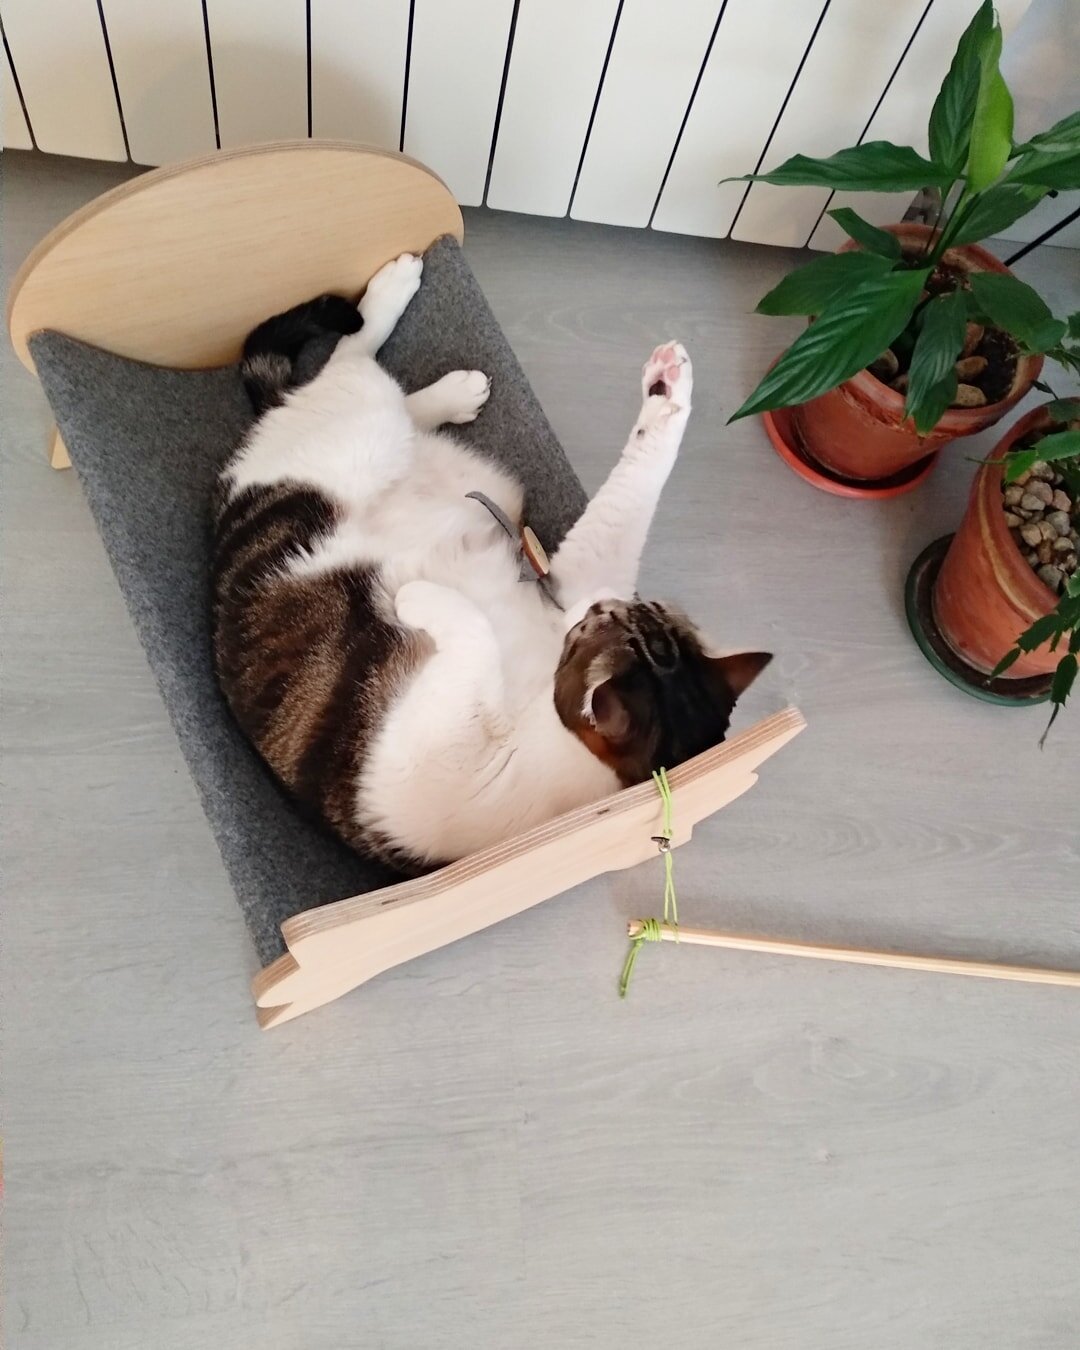 Molly is having a great time in his CATNAP bed with his HOCUS wand. What are you doing today? 😸😸😸
.
.
.
.
.
.
#cat #catsofinstagram #happy #home #friends #love #catlover #design #productdesign #designlovers #musthave #present #funnycats #funny #ga